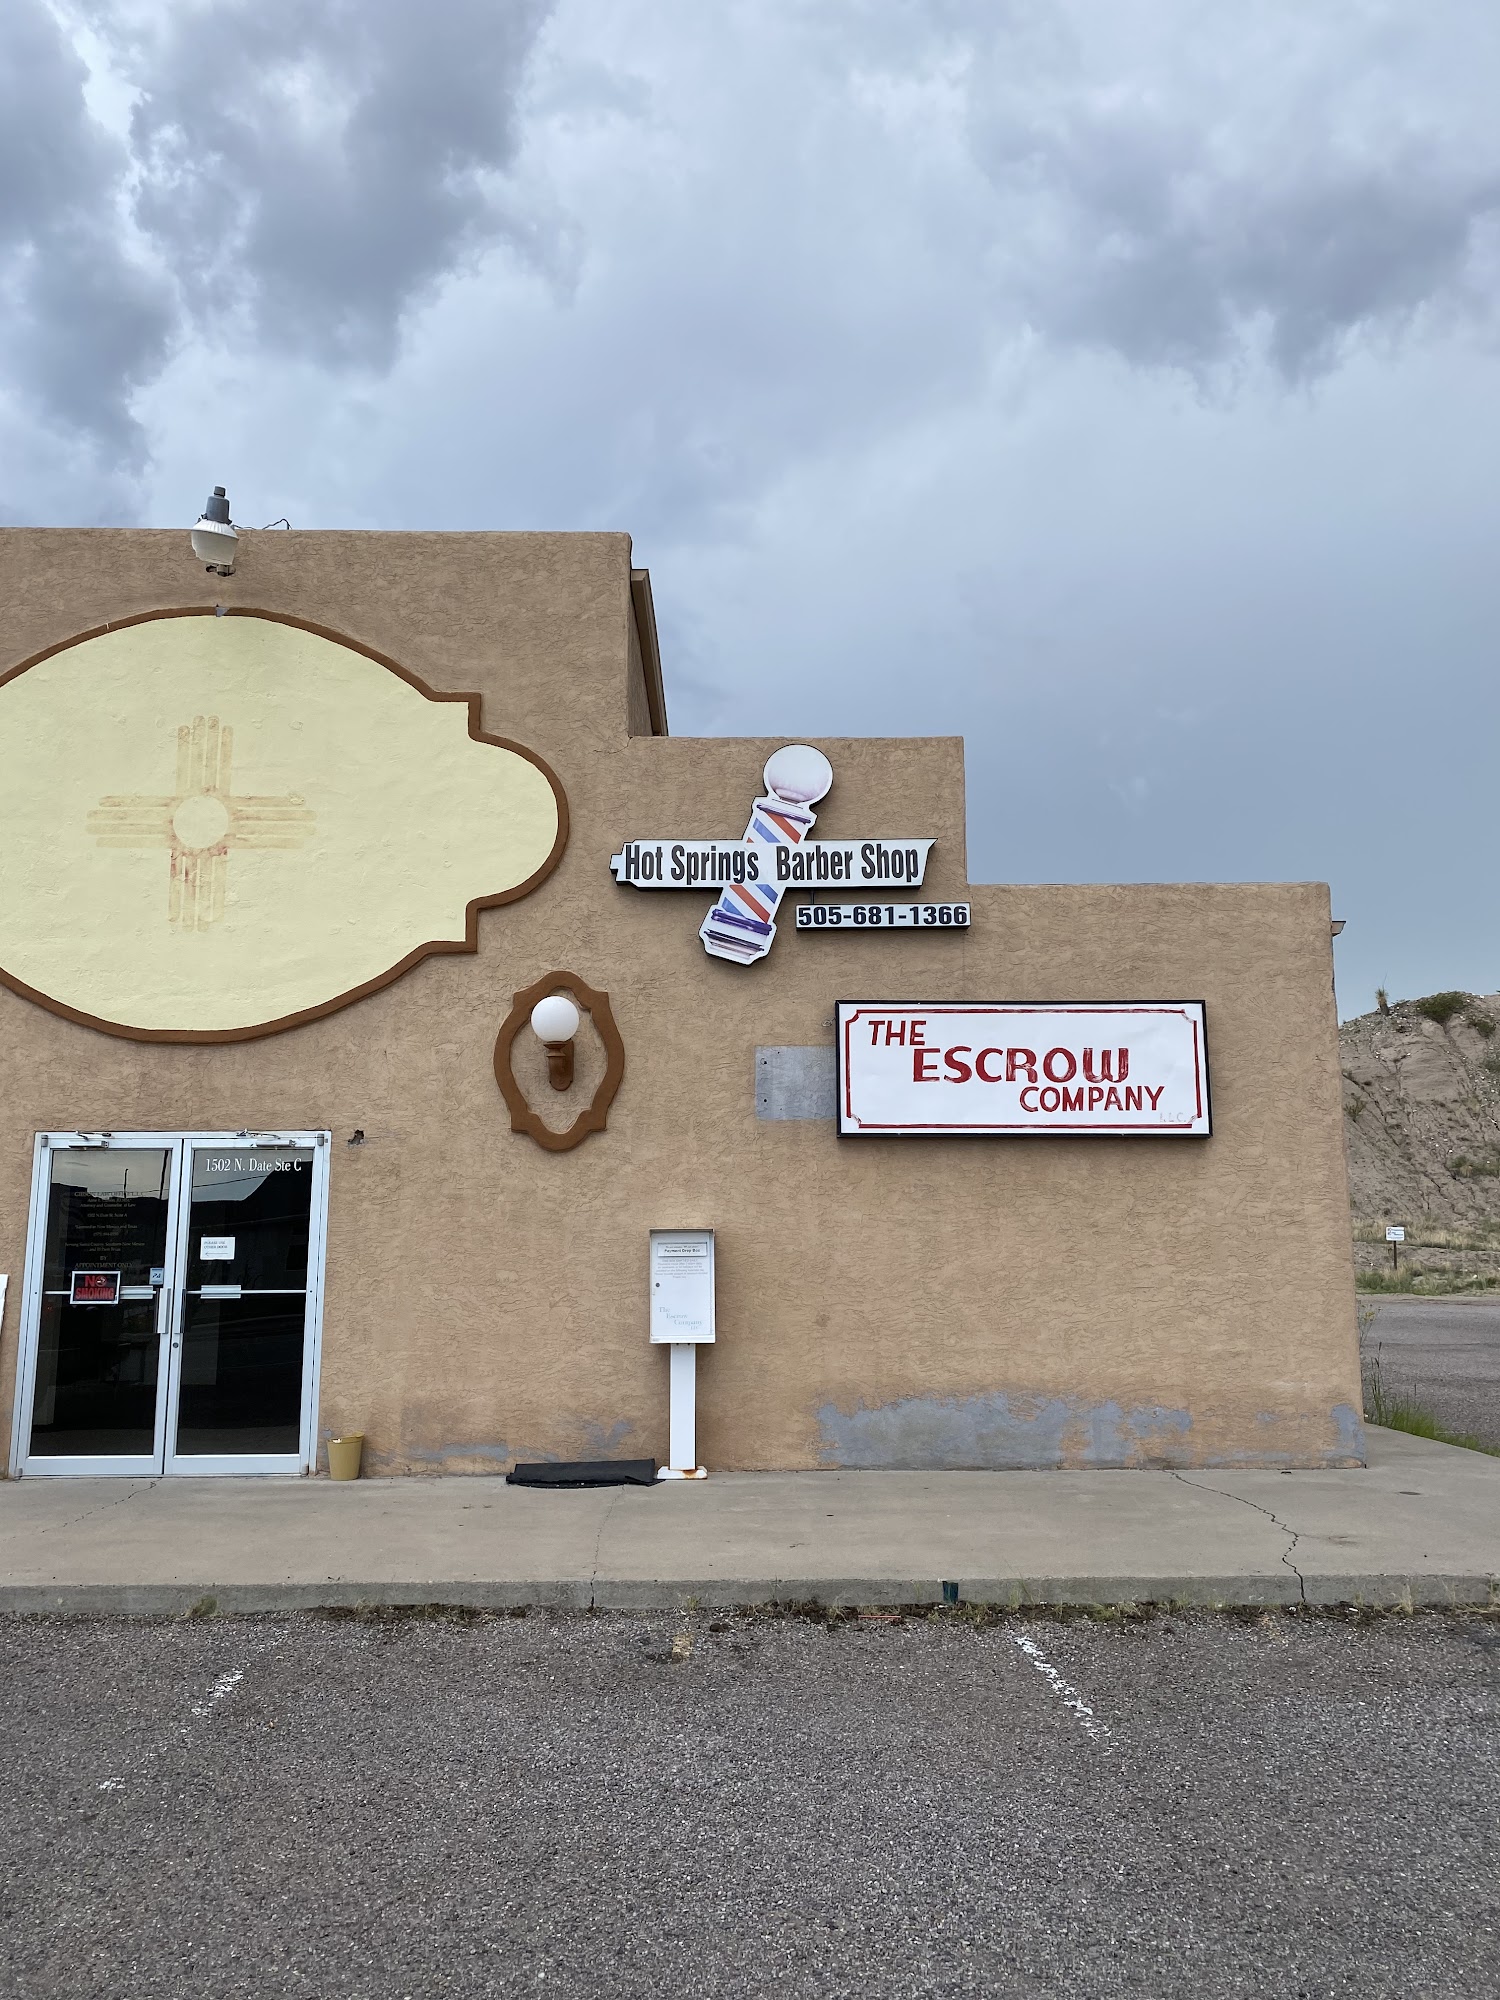 Hot Springs Barber Shop 1502 N Date St, Truth or Consequences New Mexico 87901